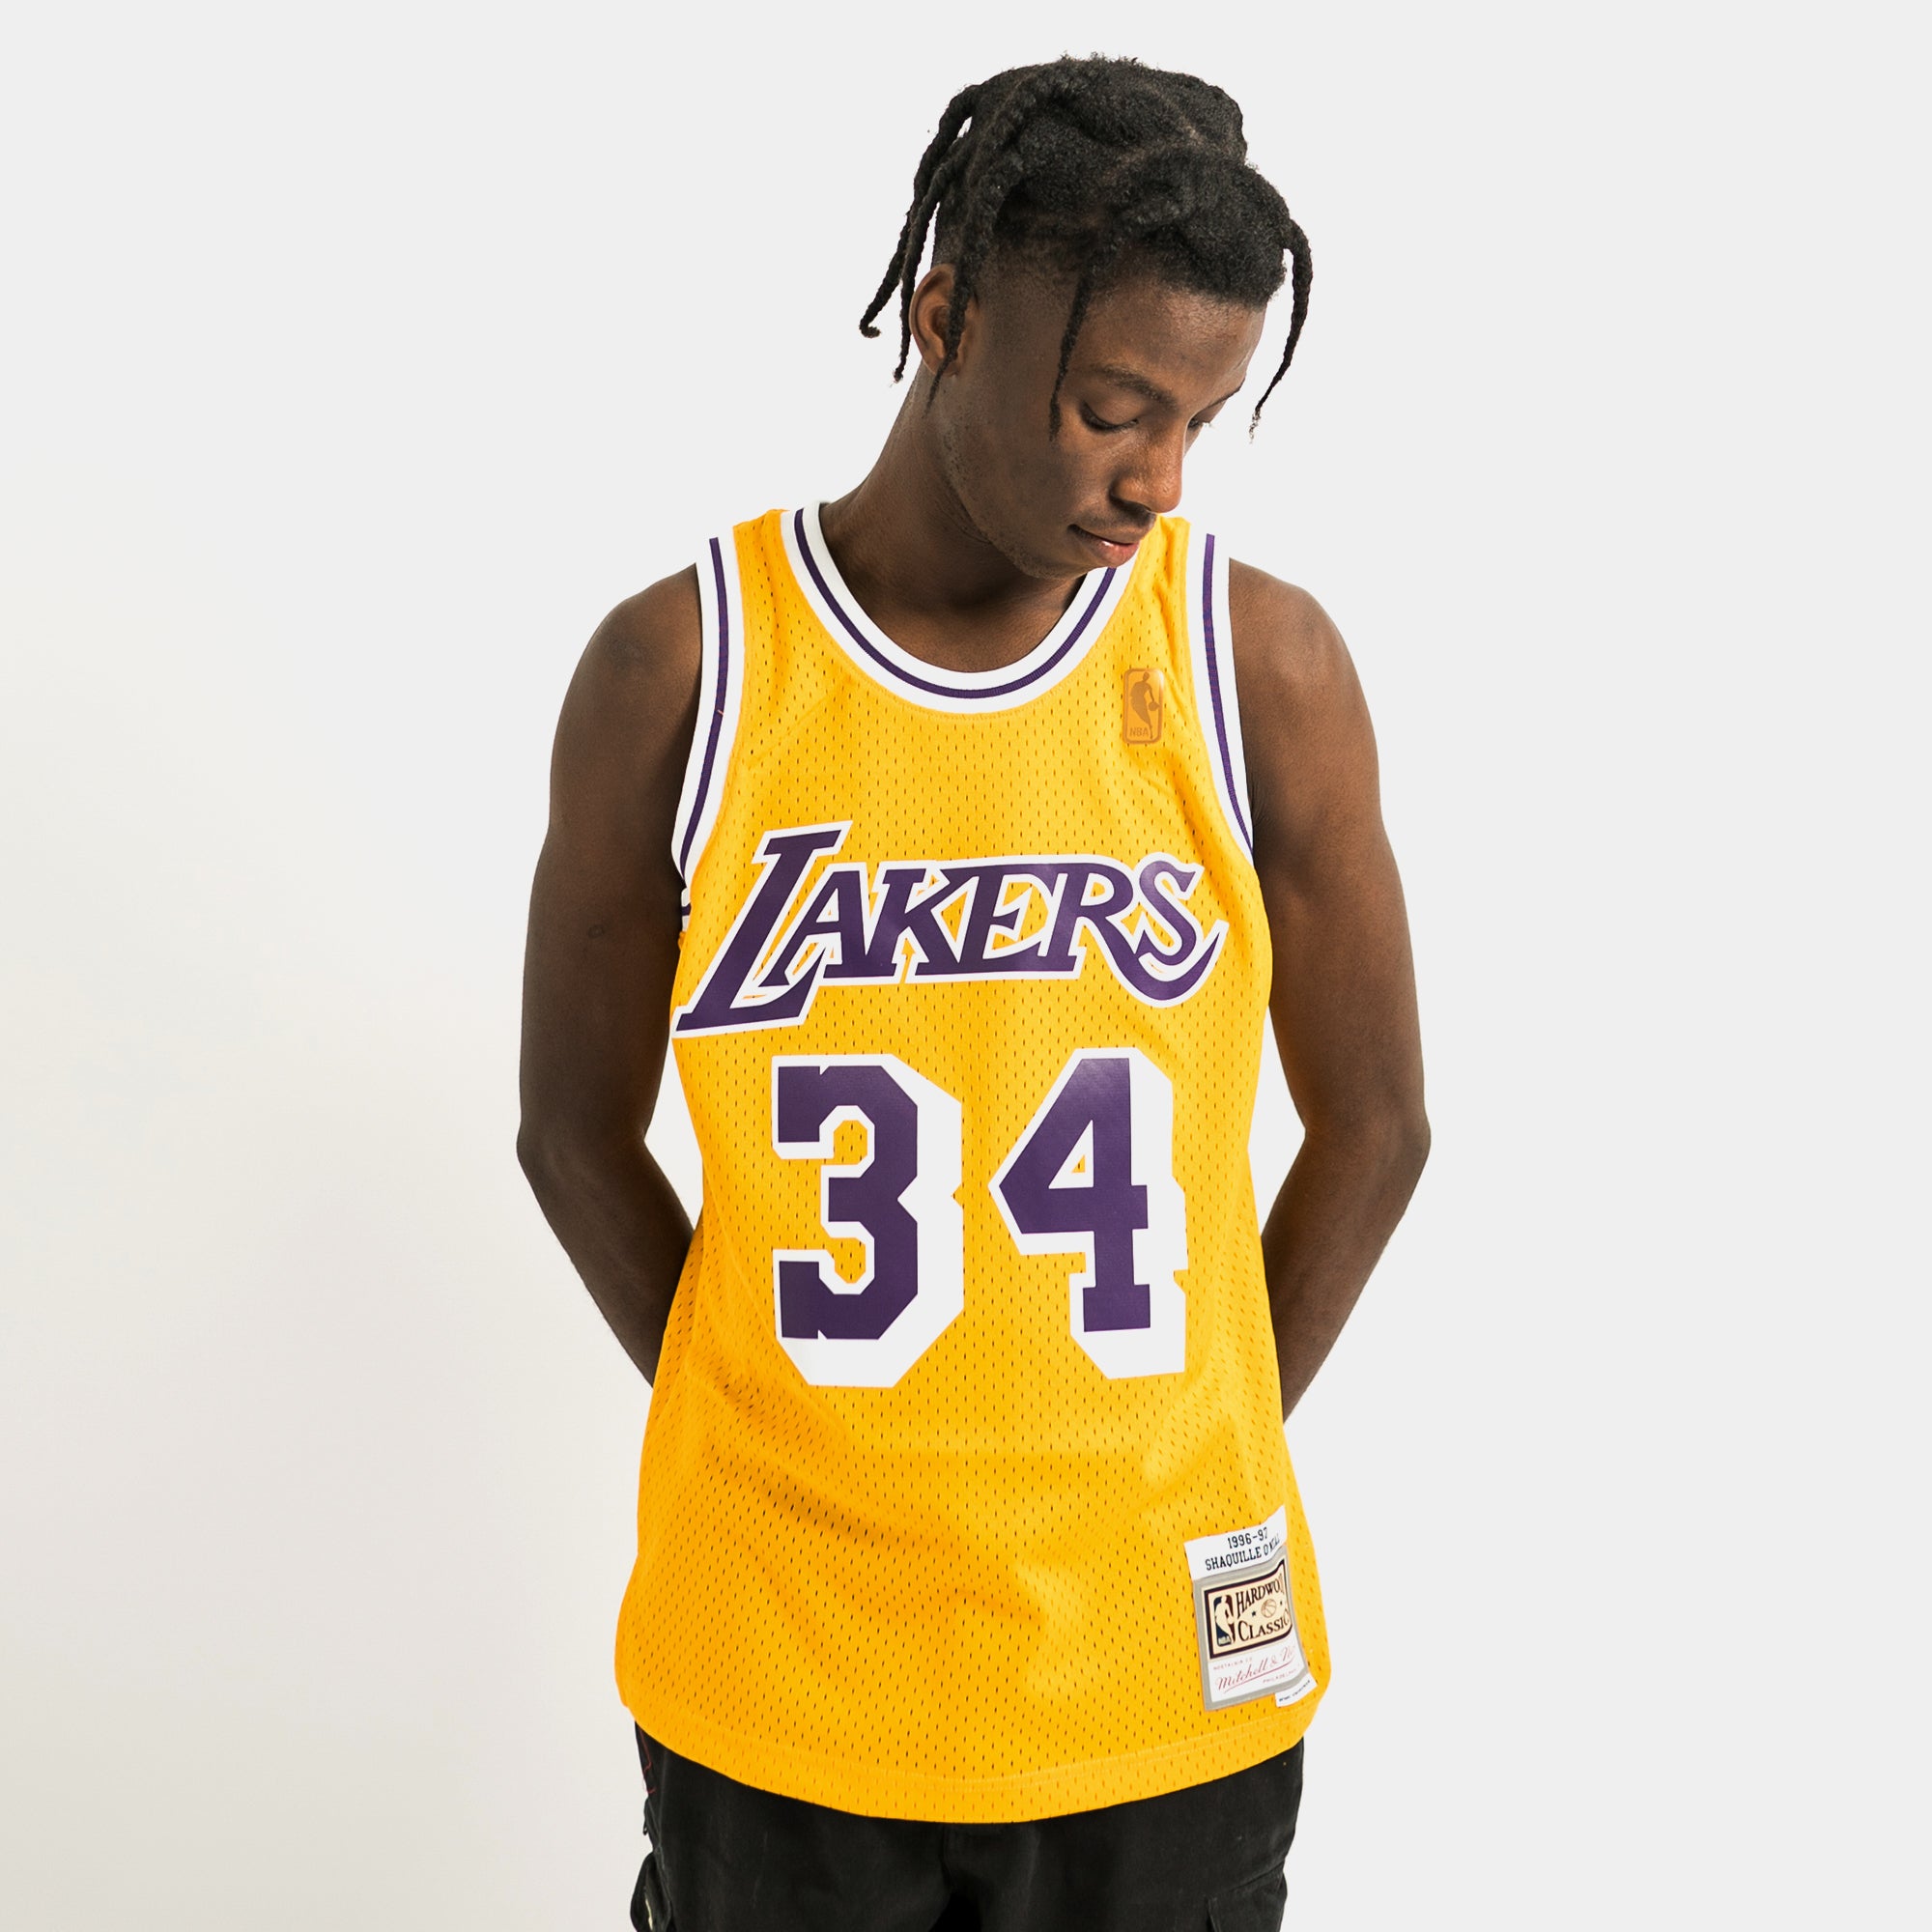 shaq lakers jersey youth